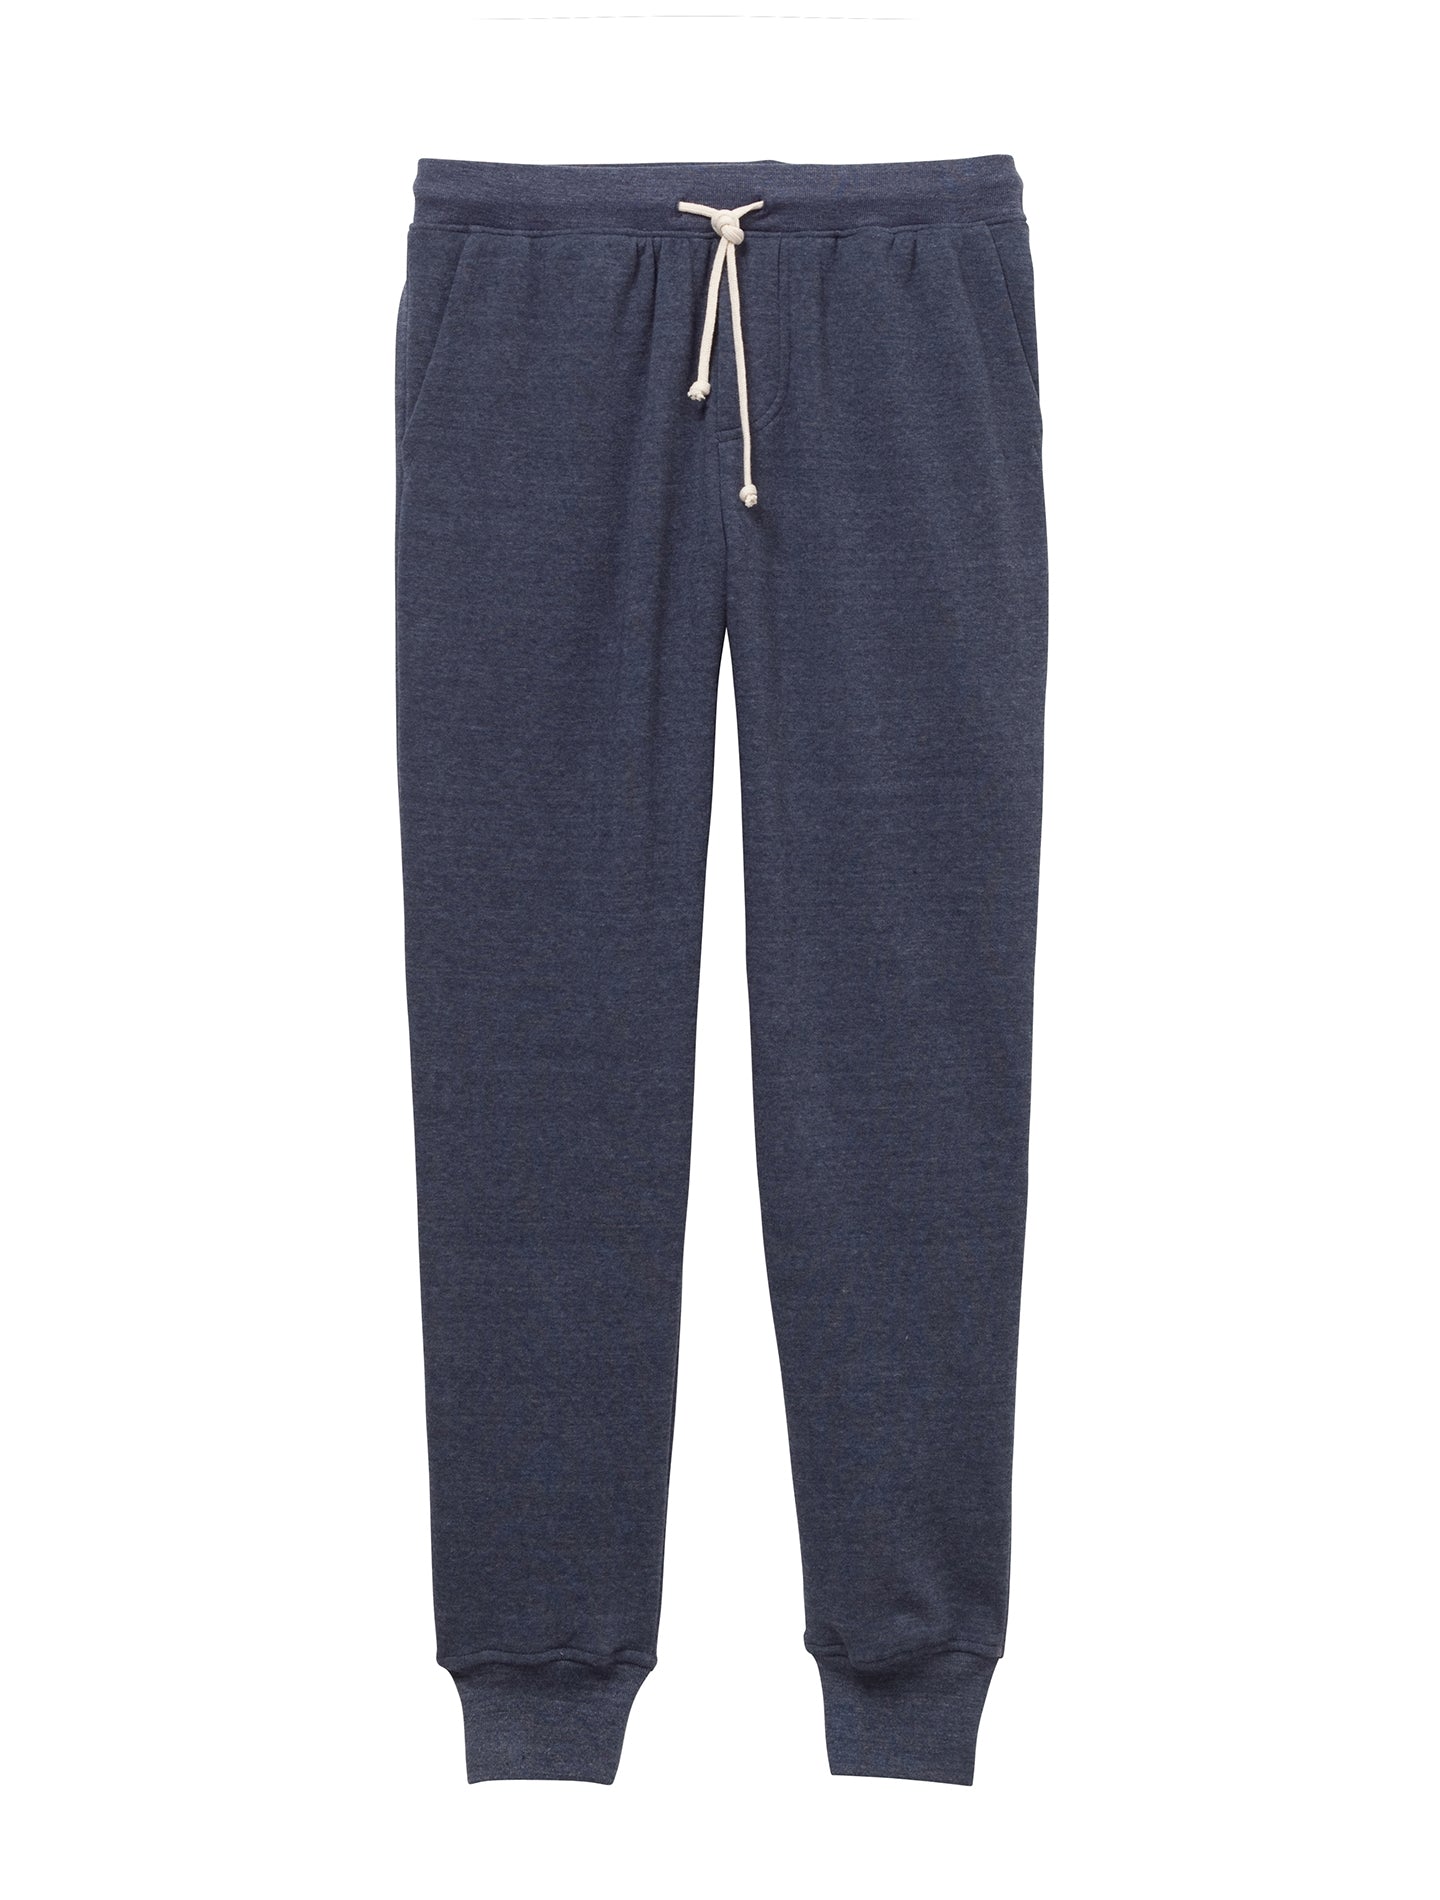 The Homestead Expression Joggers